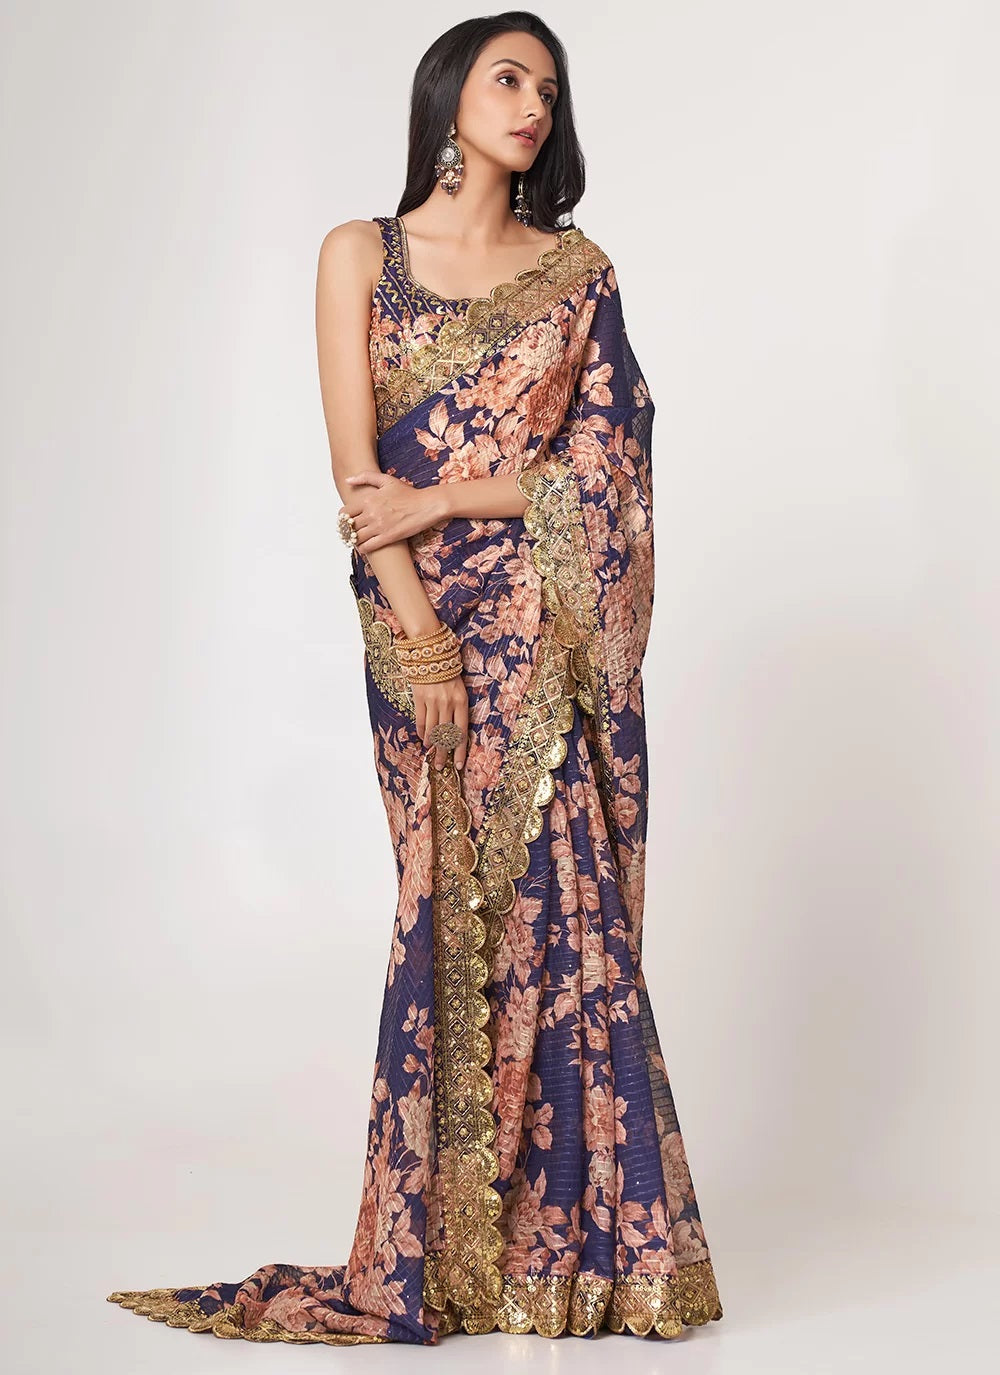 Sequins Embroidery Work with Digital Print Saree In Purple